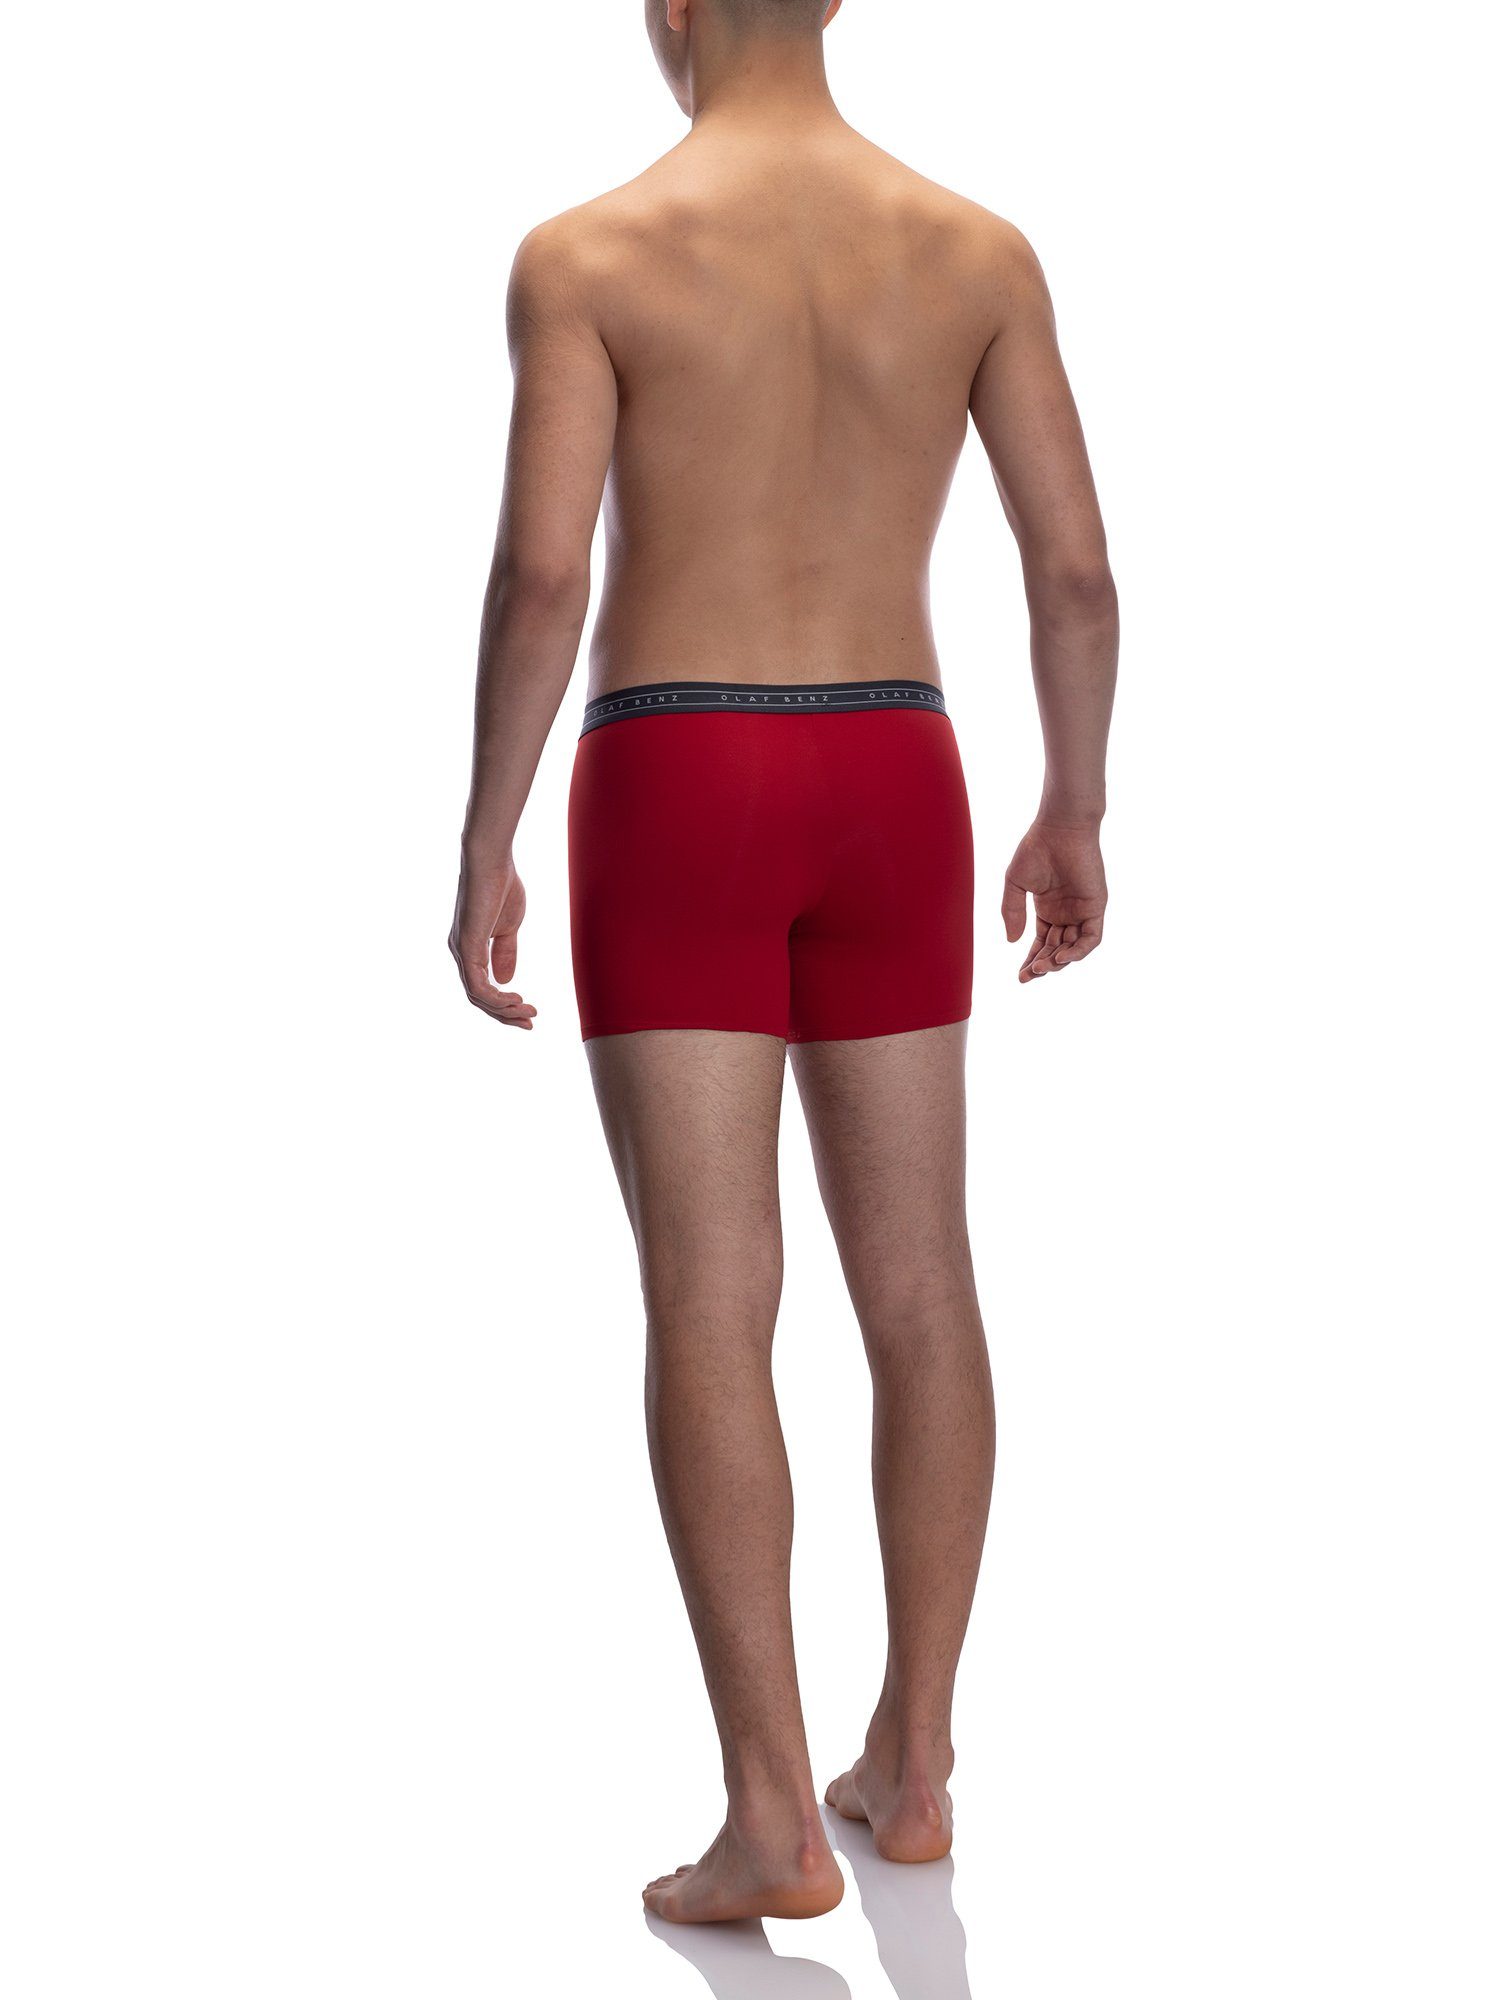 Retro Boxer Boxerpants RED Benz 2059 rot (1-St) Olaf